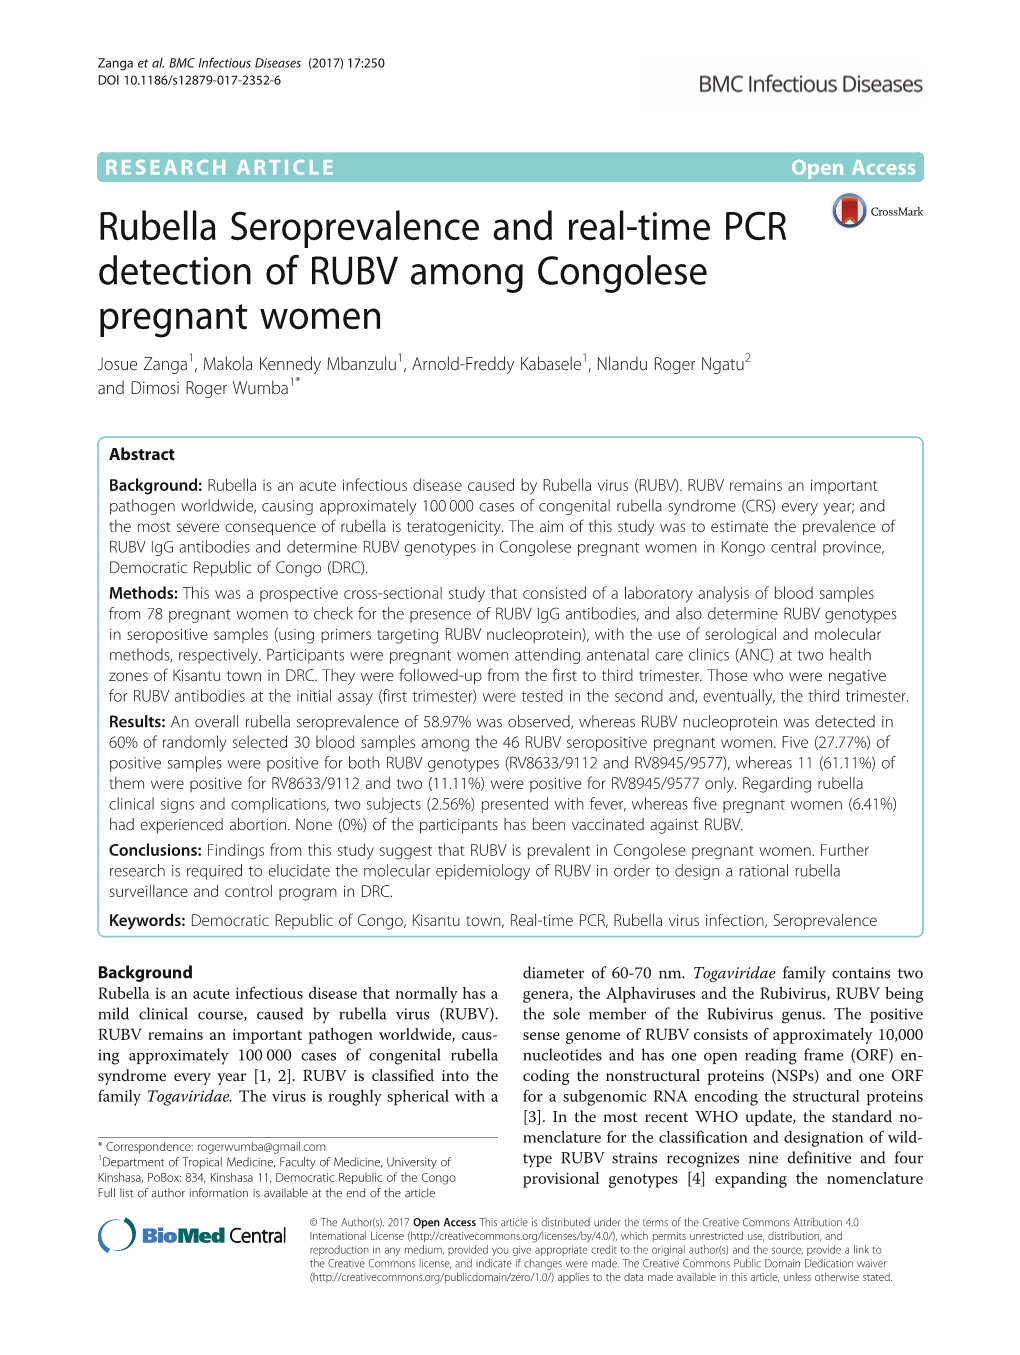 Rubella Seroprevalence and Real-Time PCR Detection of RUBV